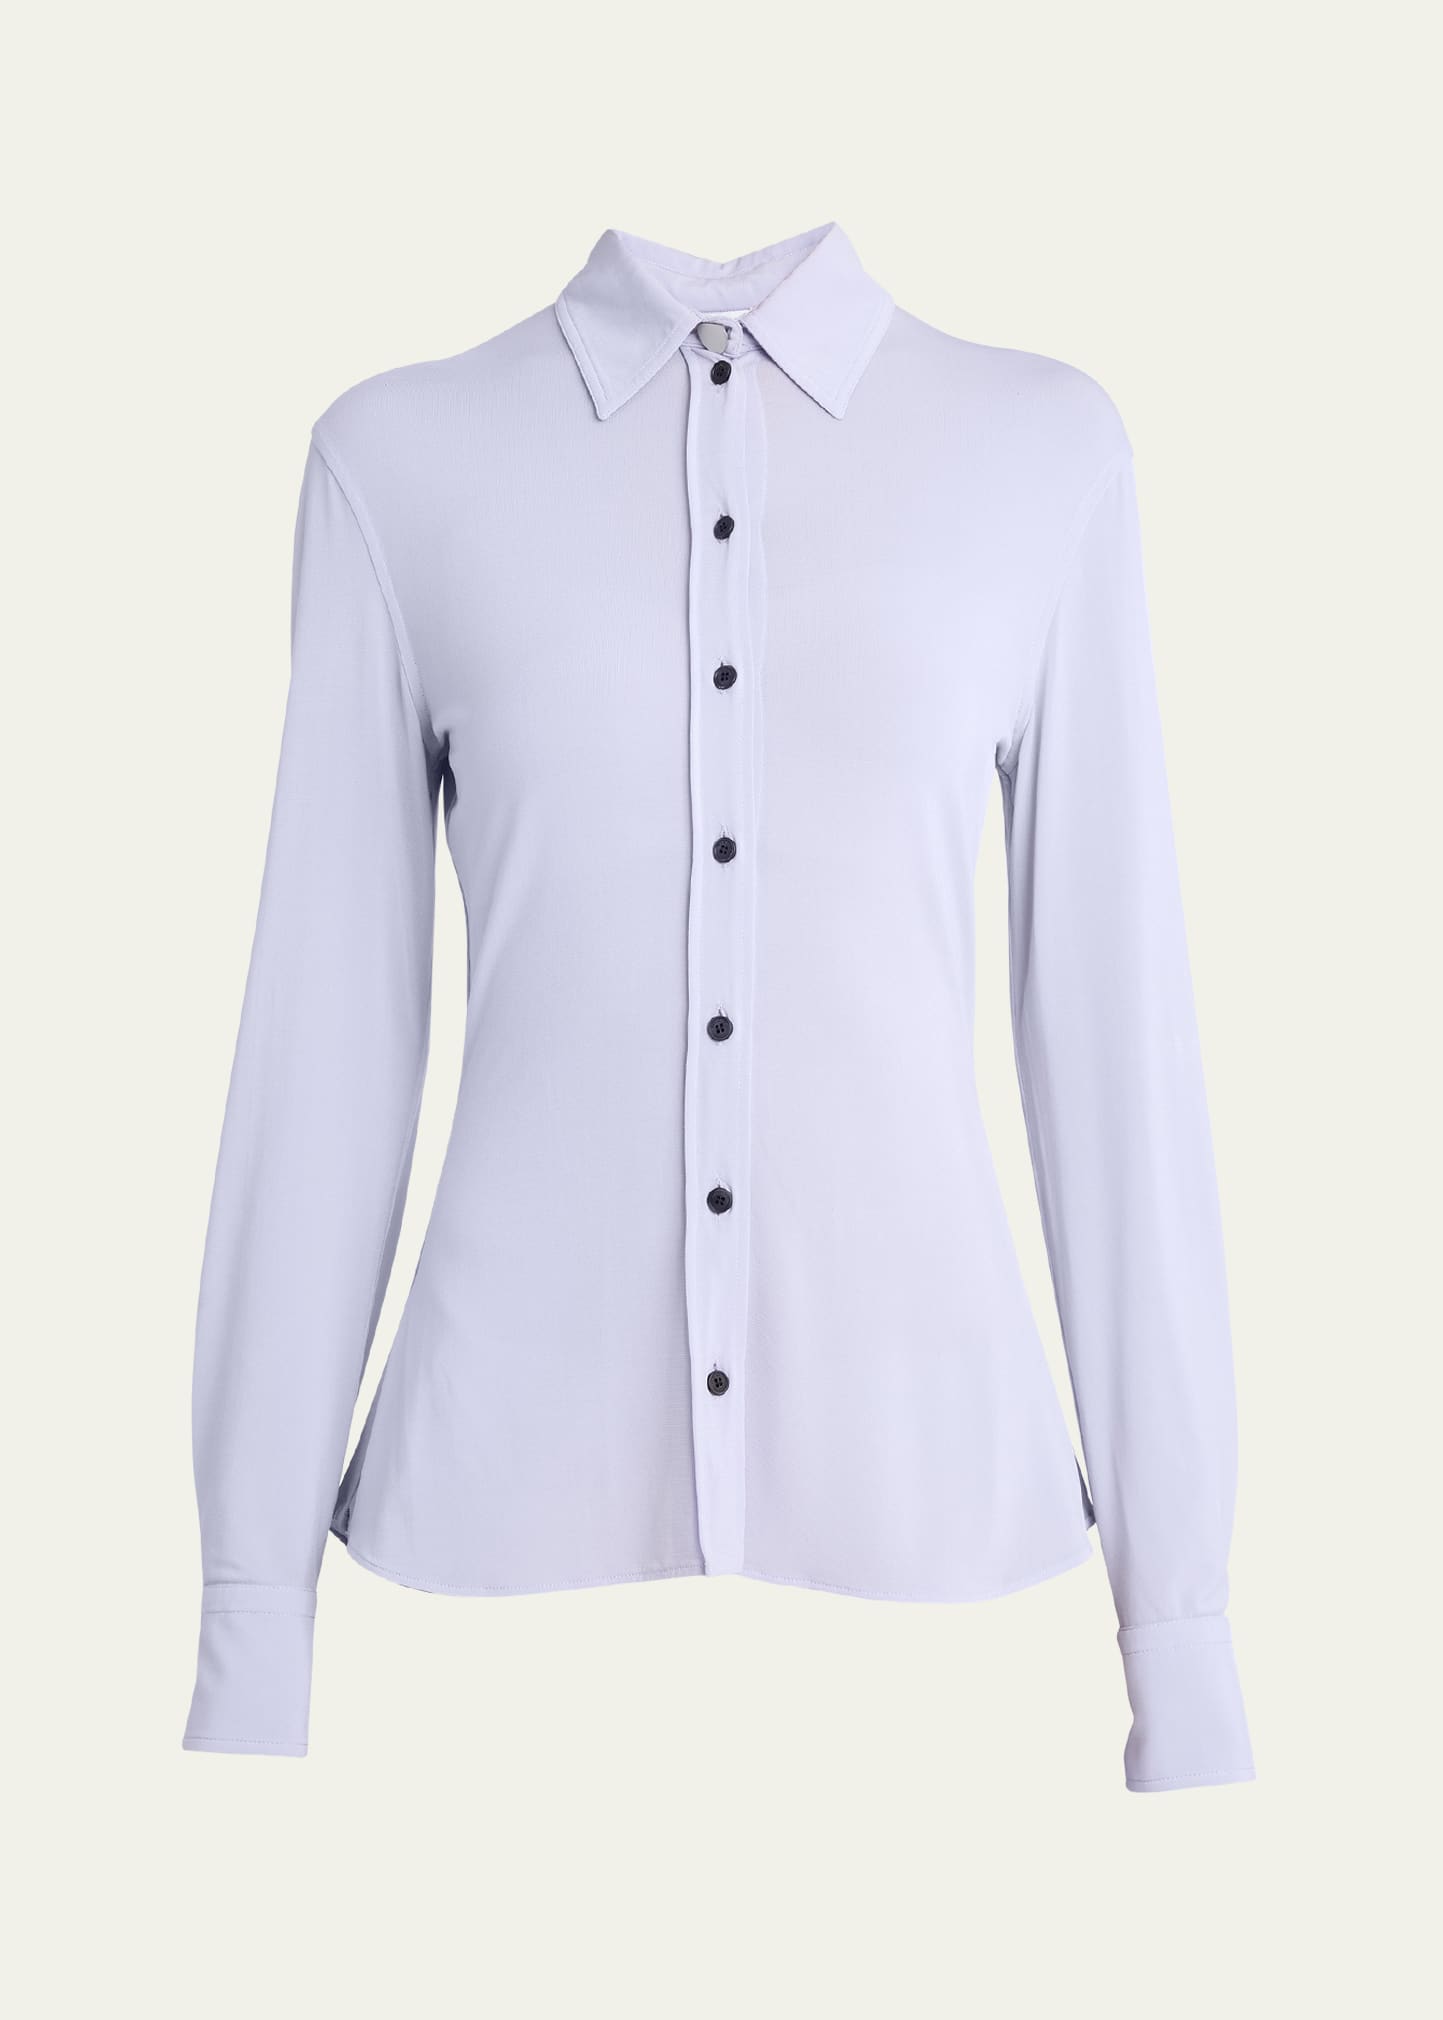 Stretch Viscose Jersey Button Down Top